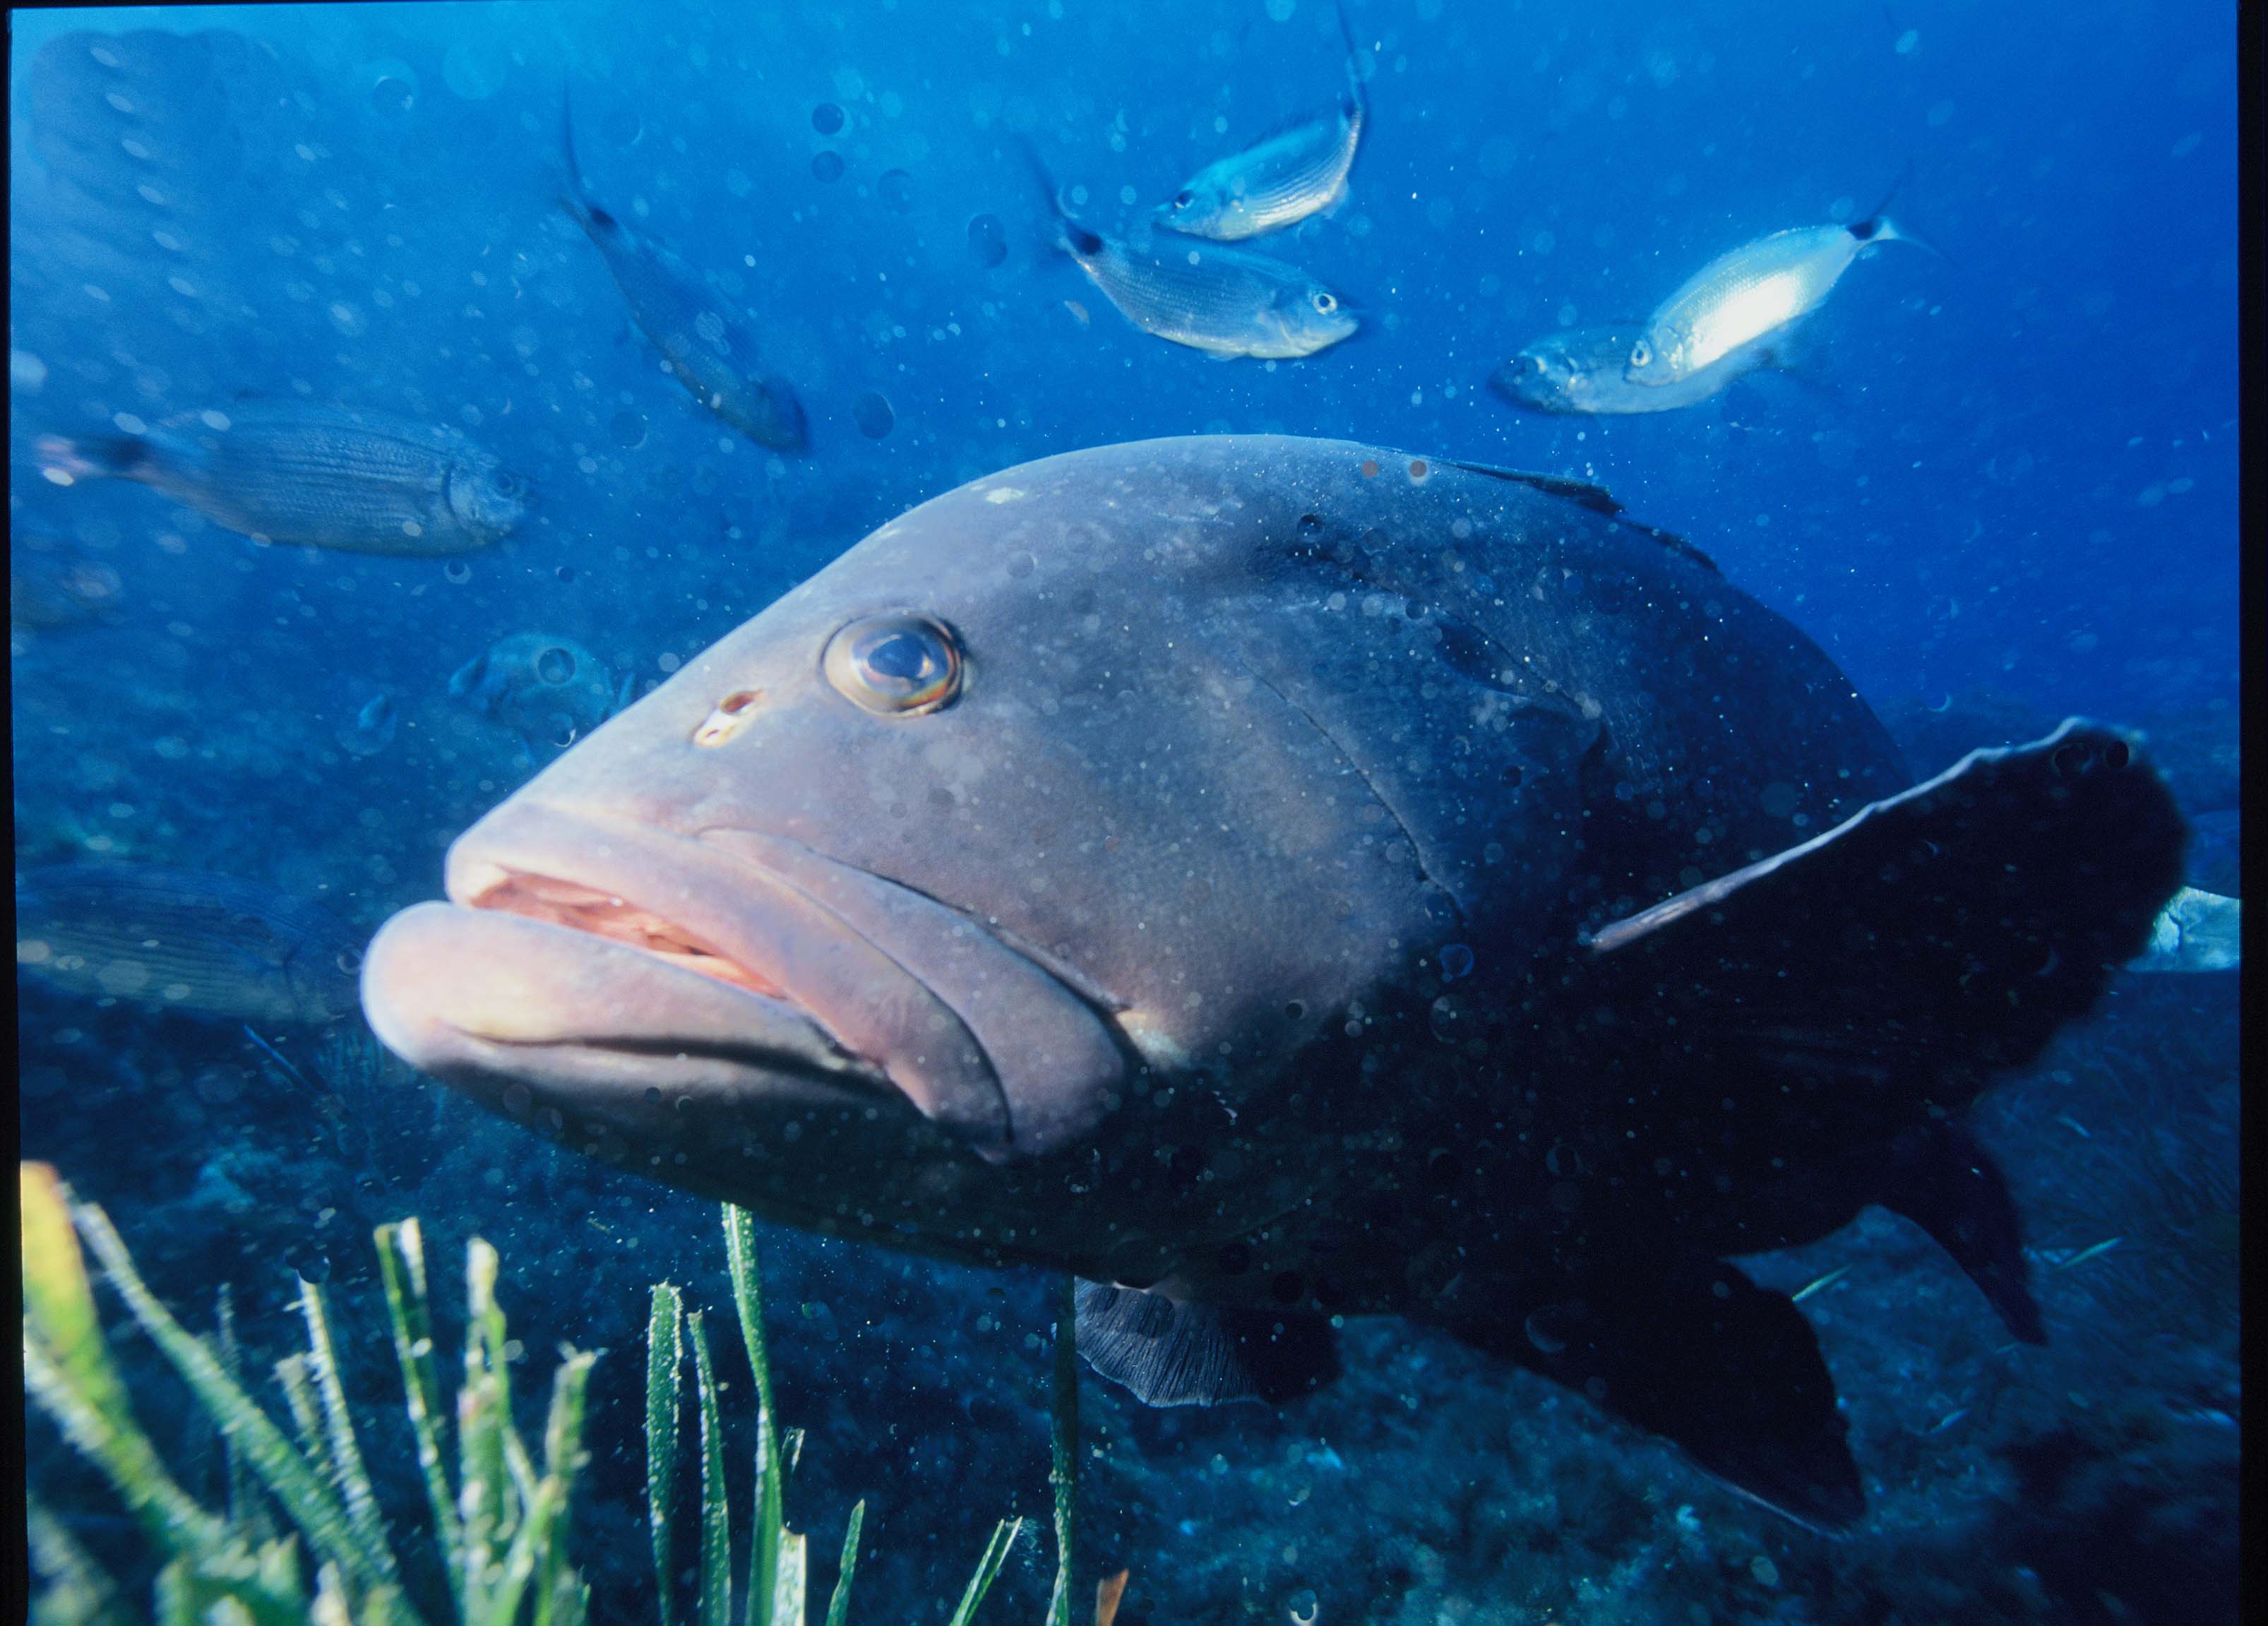 Dusky grouper photo and wallpaper. Nice Dusky grouper picture